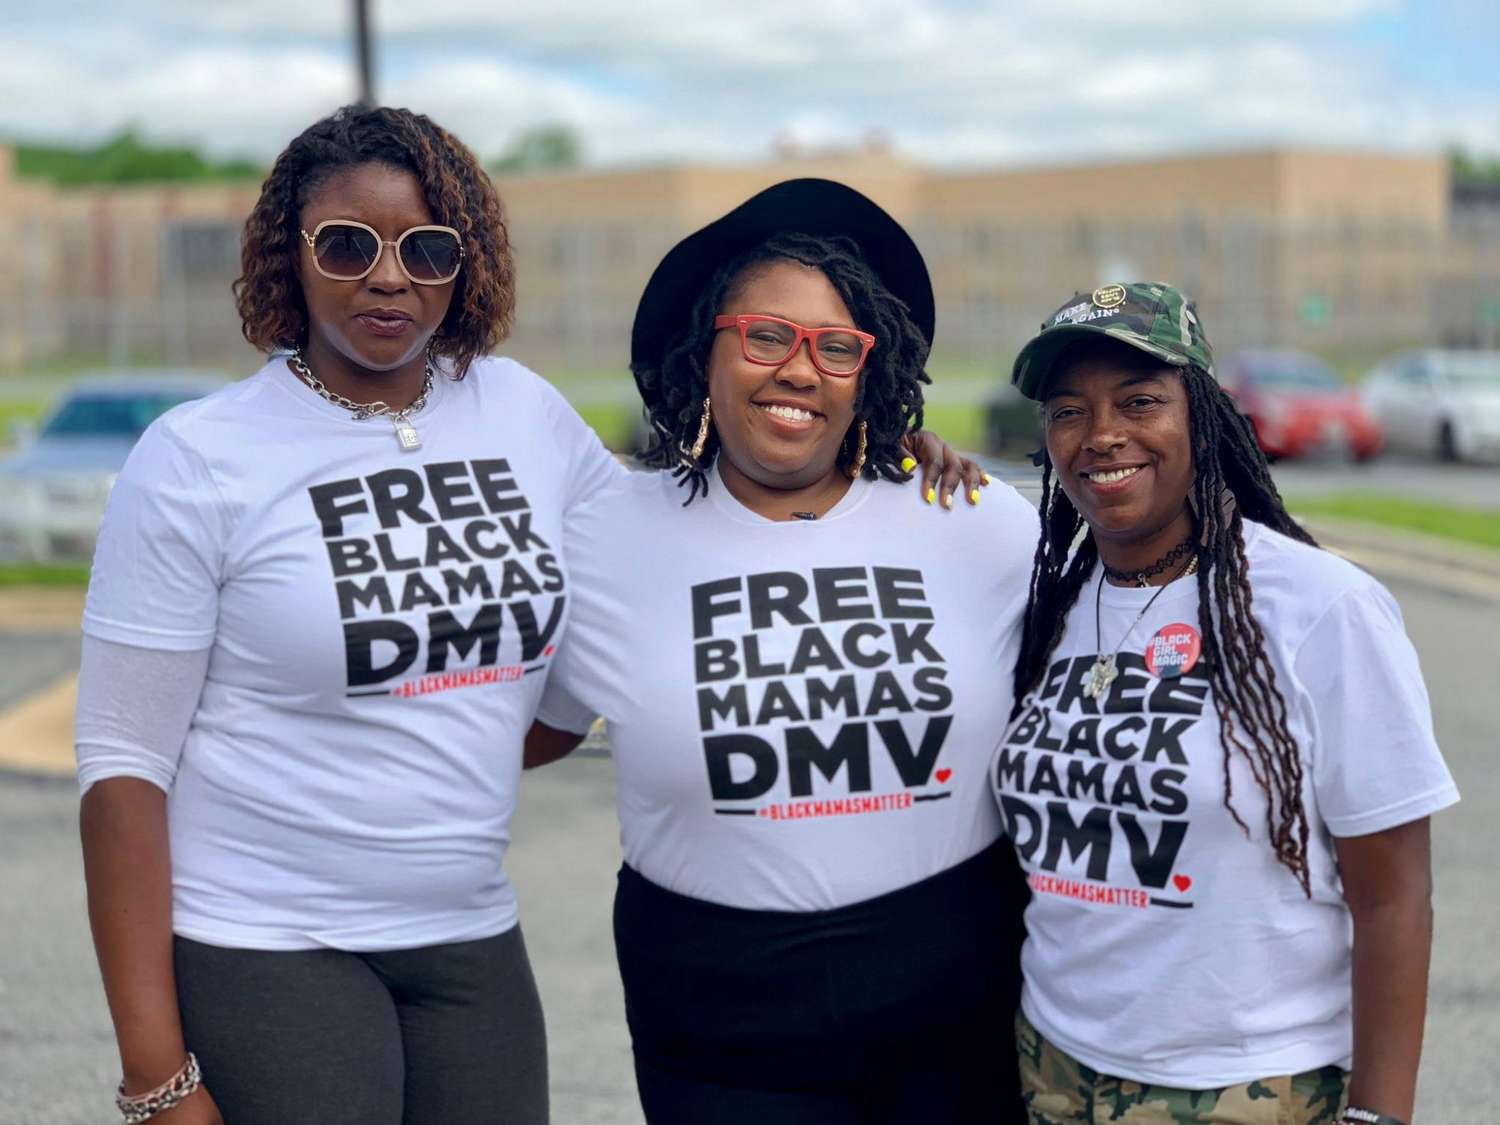 An activist group is raising millions to bail black moms out of jail for mother's day.